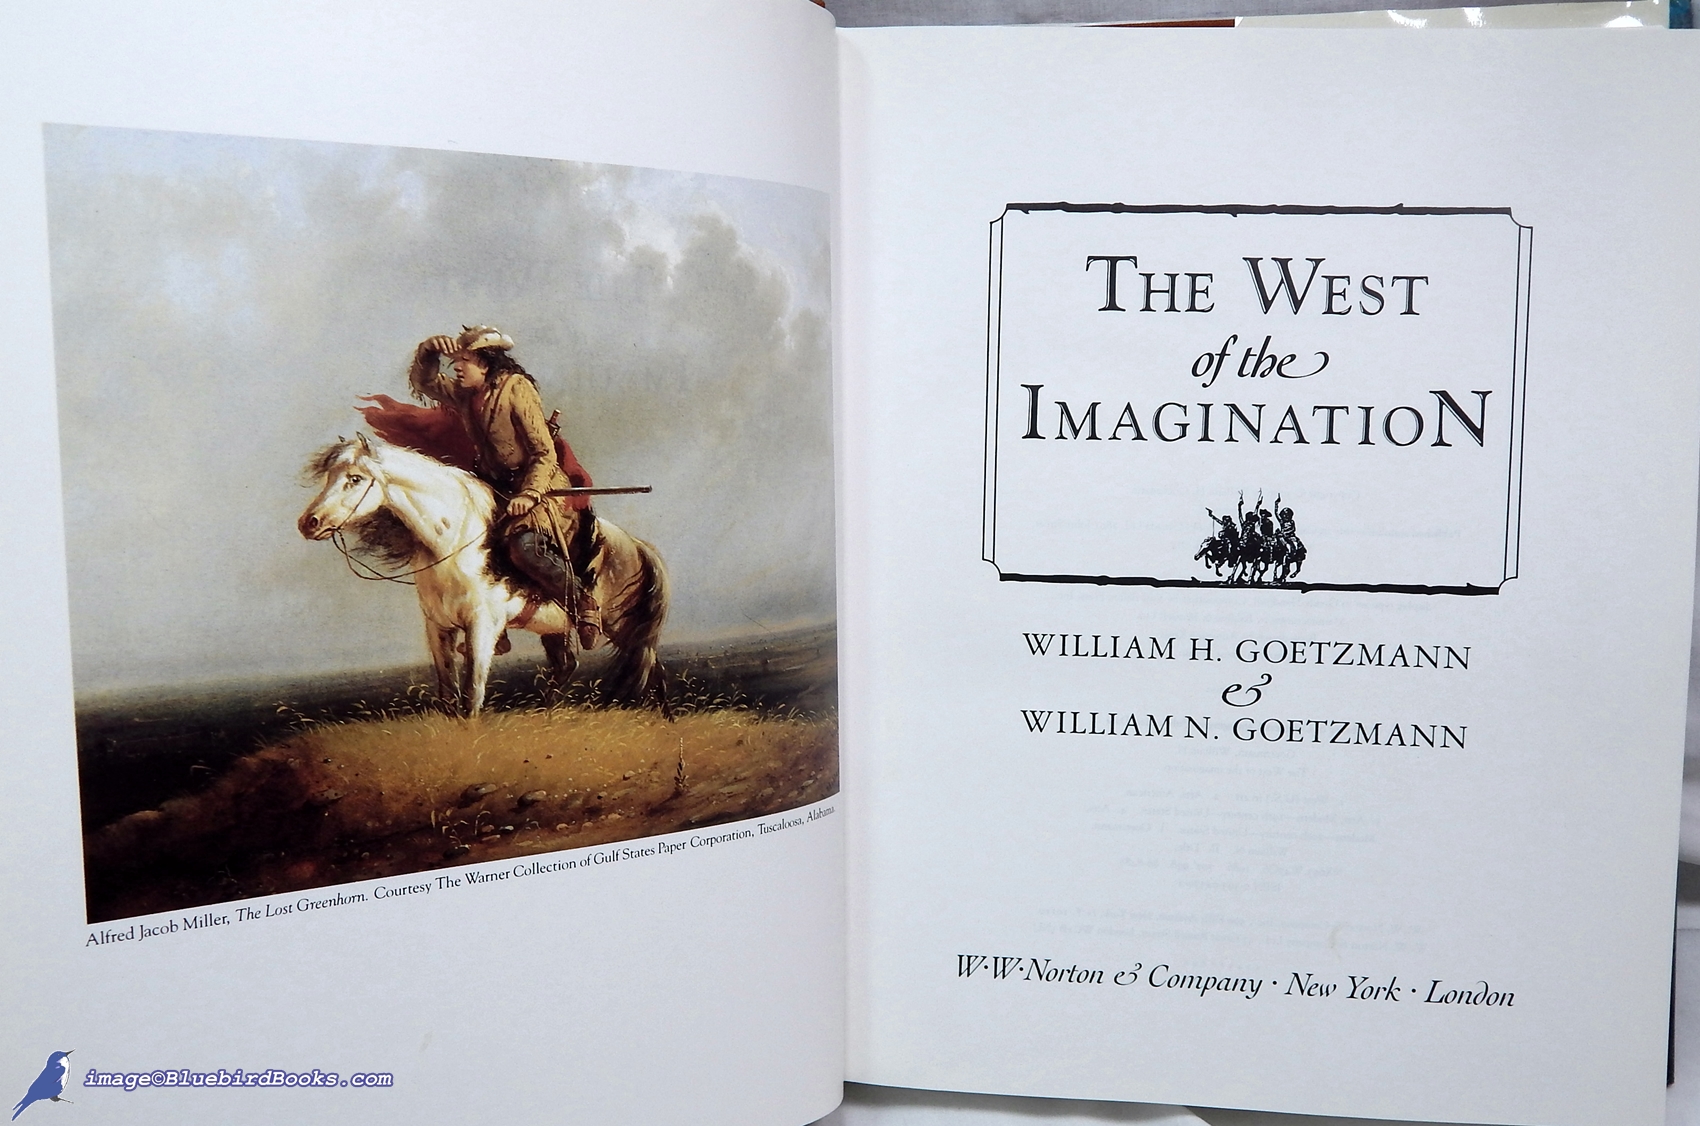 GOETZMANN, WILLIAM H.; GOETZMANN, WILLIAM N. - The West of the Imagination (the Companion to the Pbs Series)